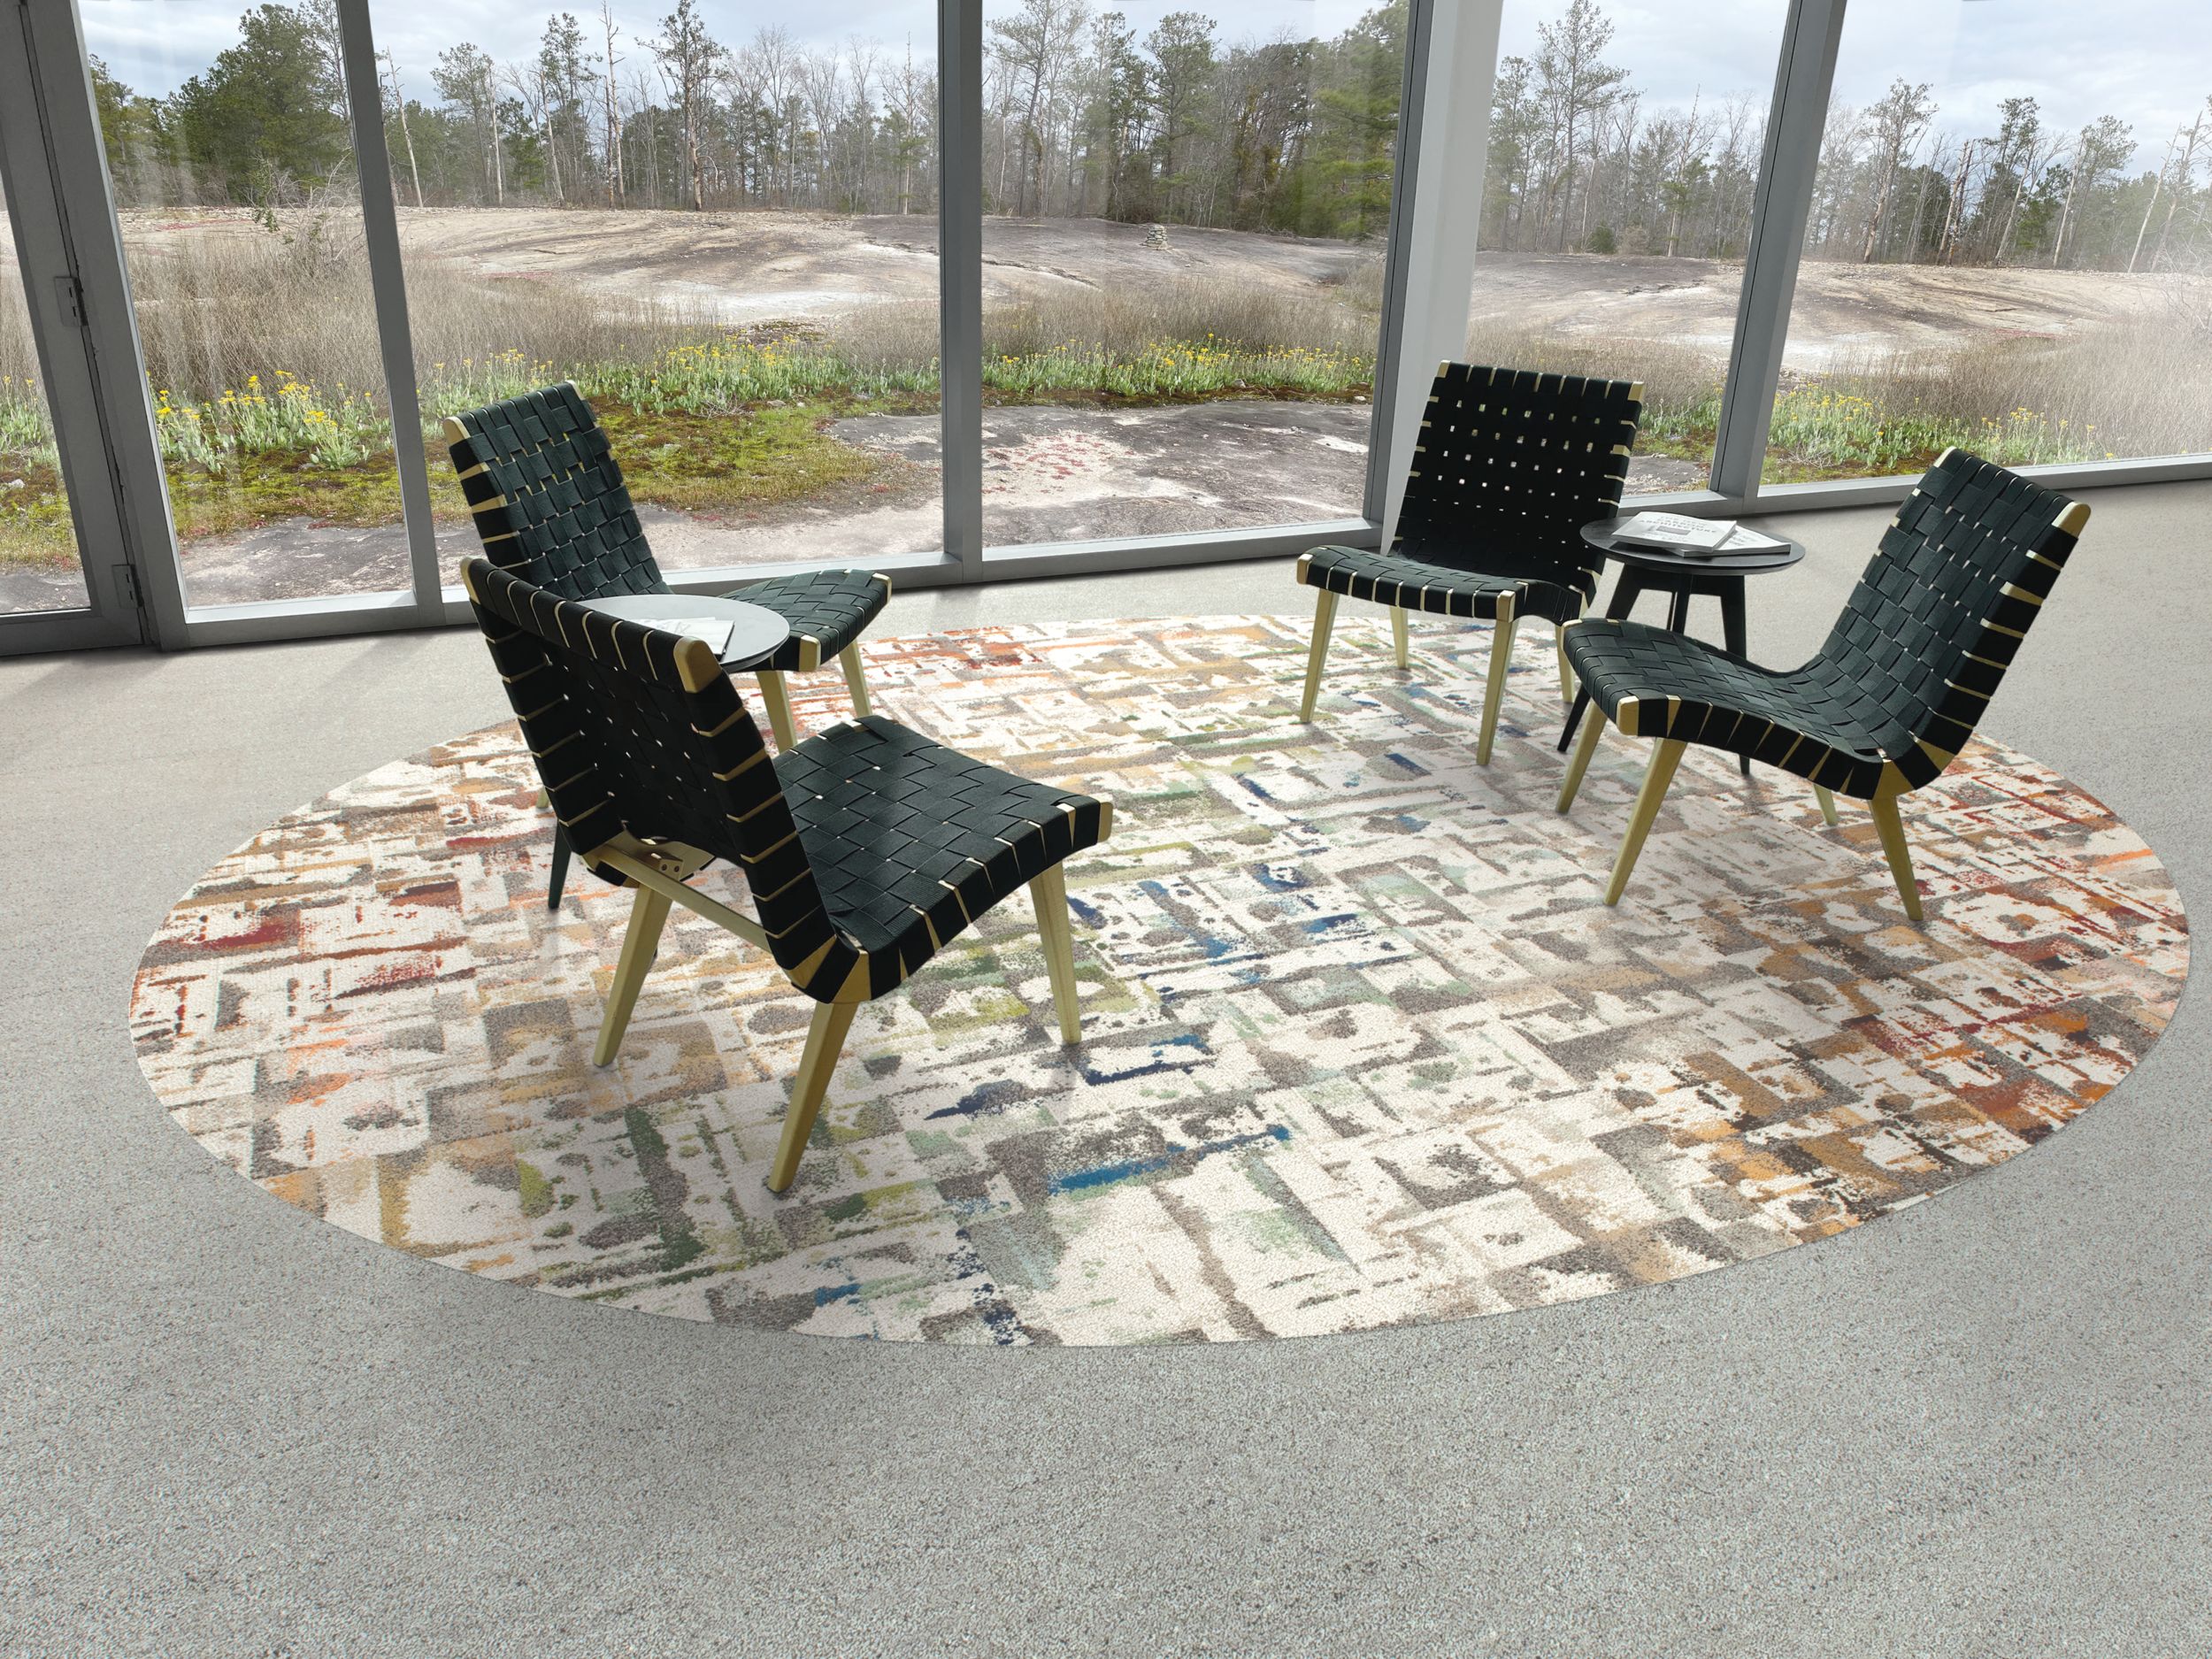 Interface Panola Mountain and Rockland Road carpet tile in glass-enclosed seating area with four chairs numéro d’image 7